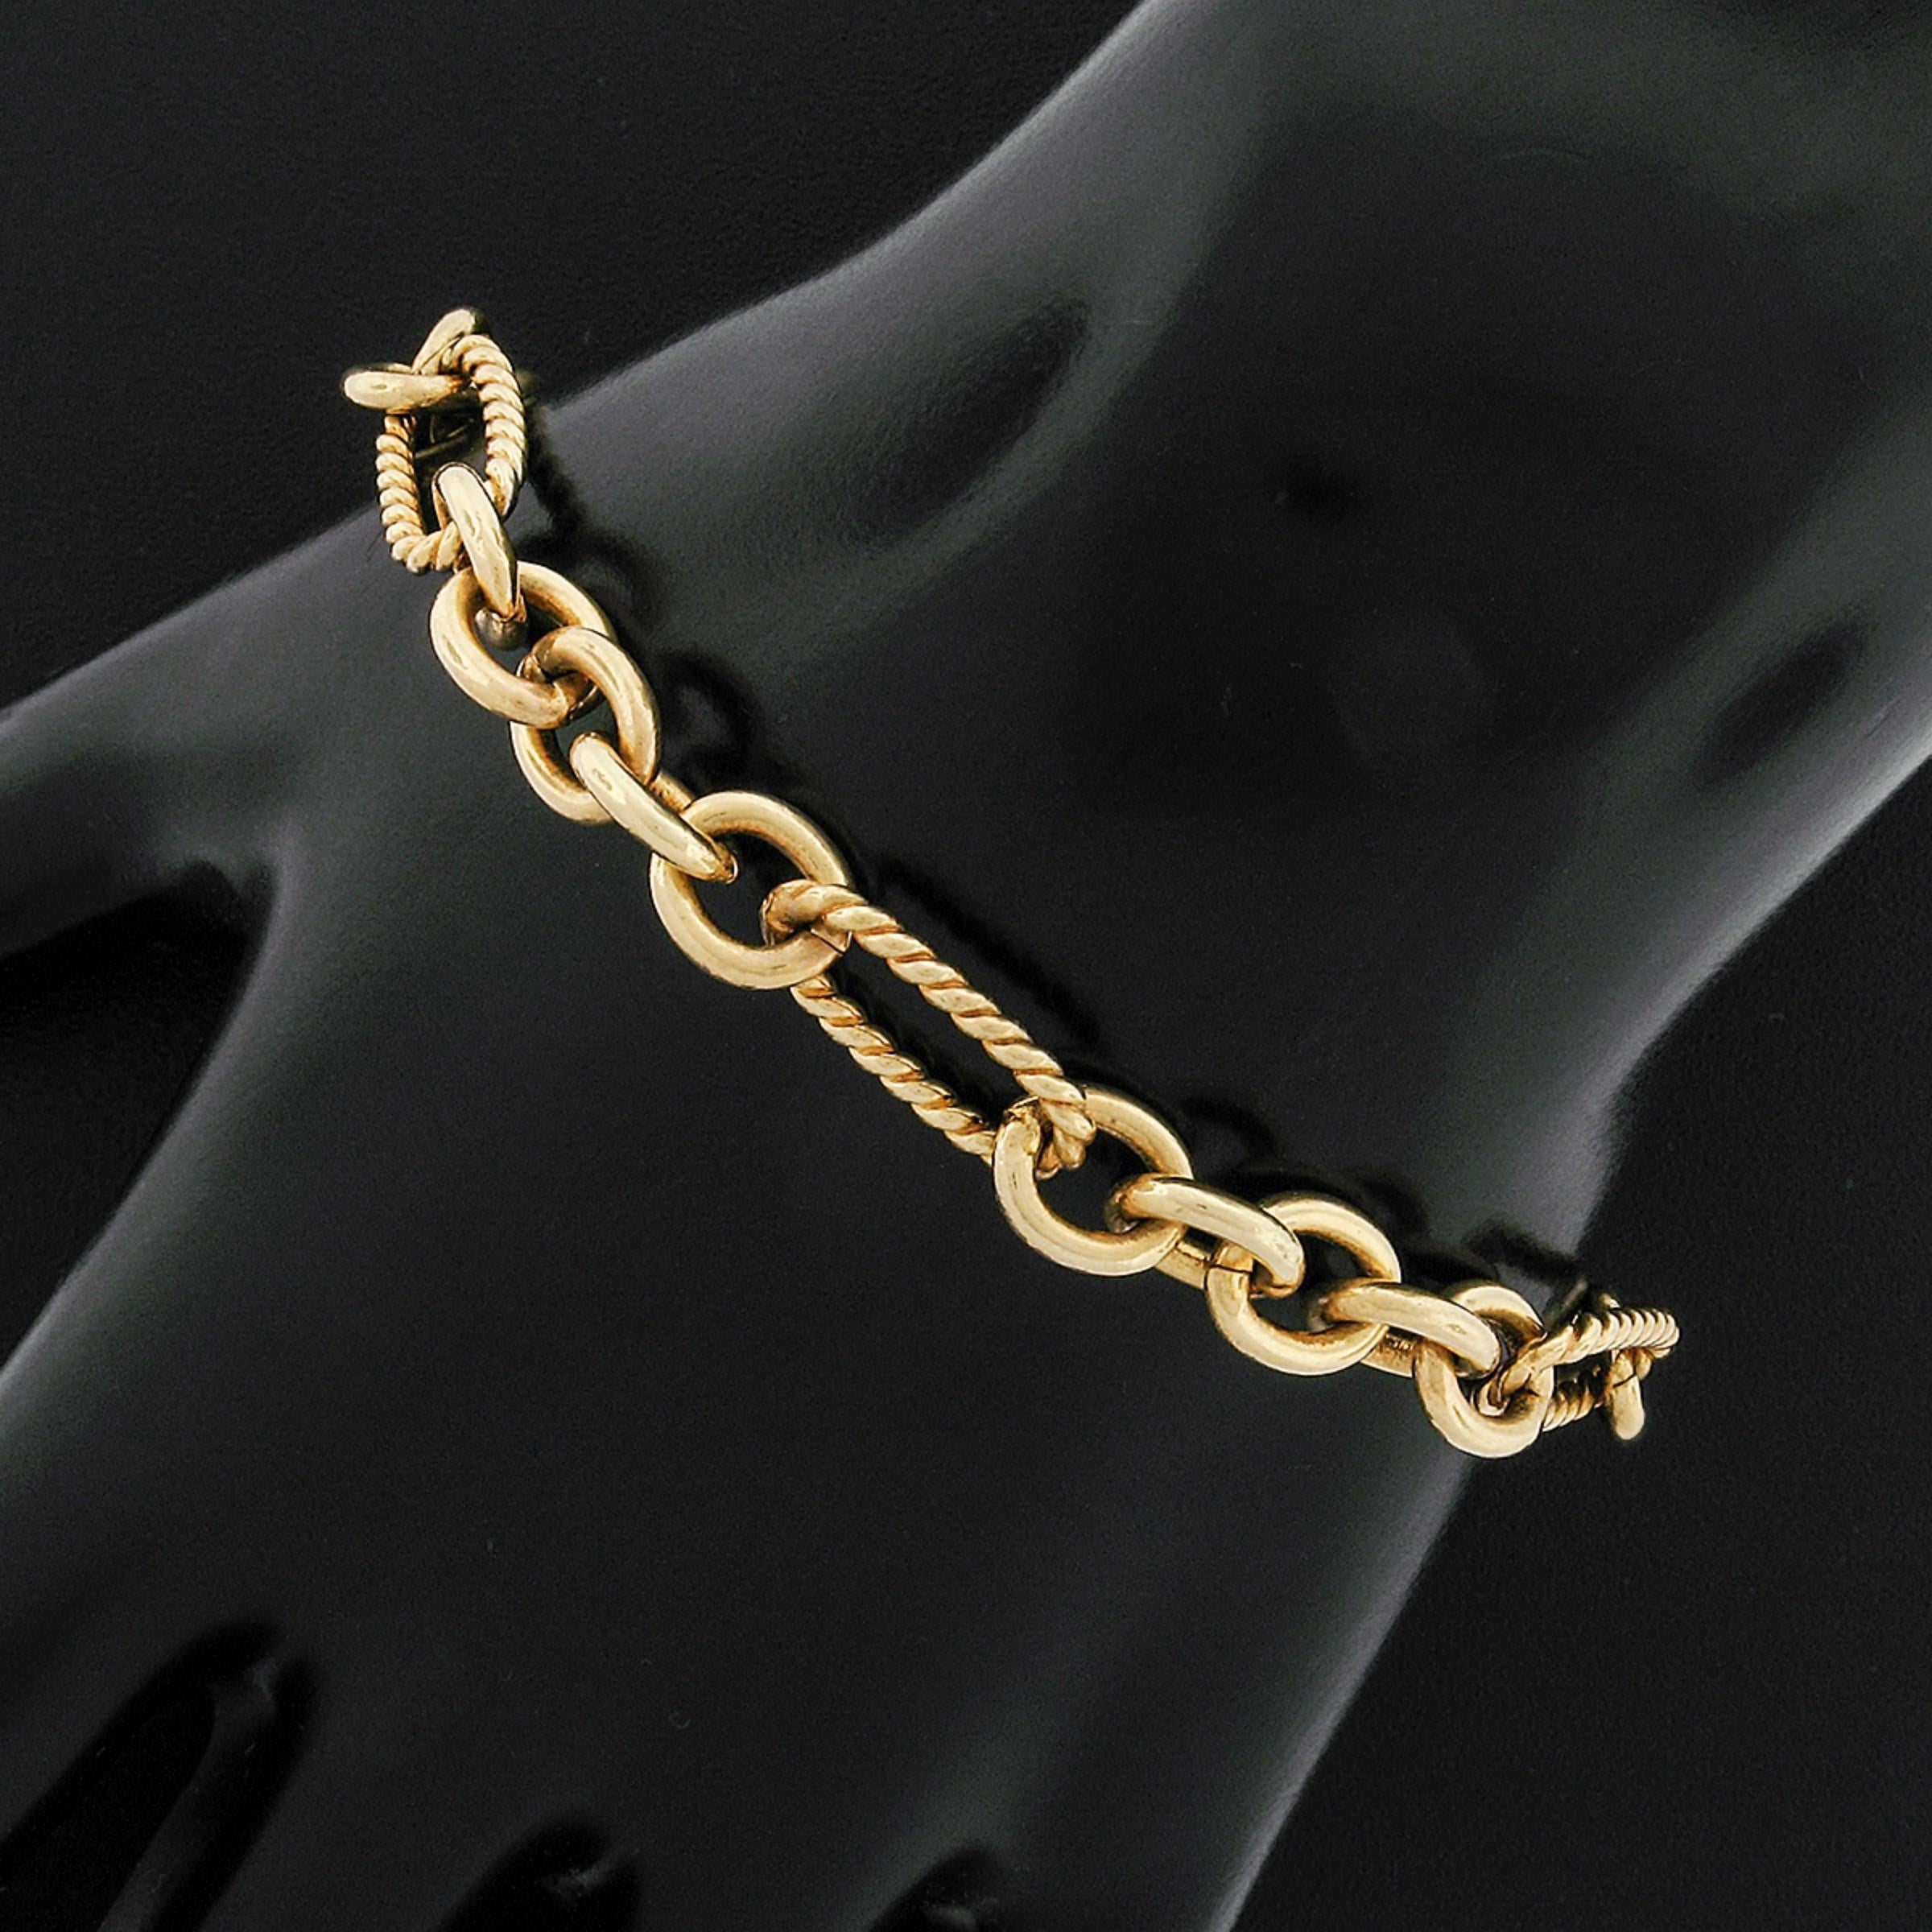 Here we have a 100% authentic David Yurman chain bracelet crafted from solid 18k yellow gold. The chain is made from both Yurman's signature twisted wire and smooth polished cable links. This gorgeous designer piece remains in excellent condition